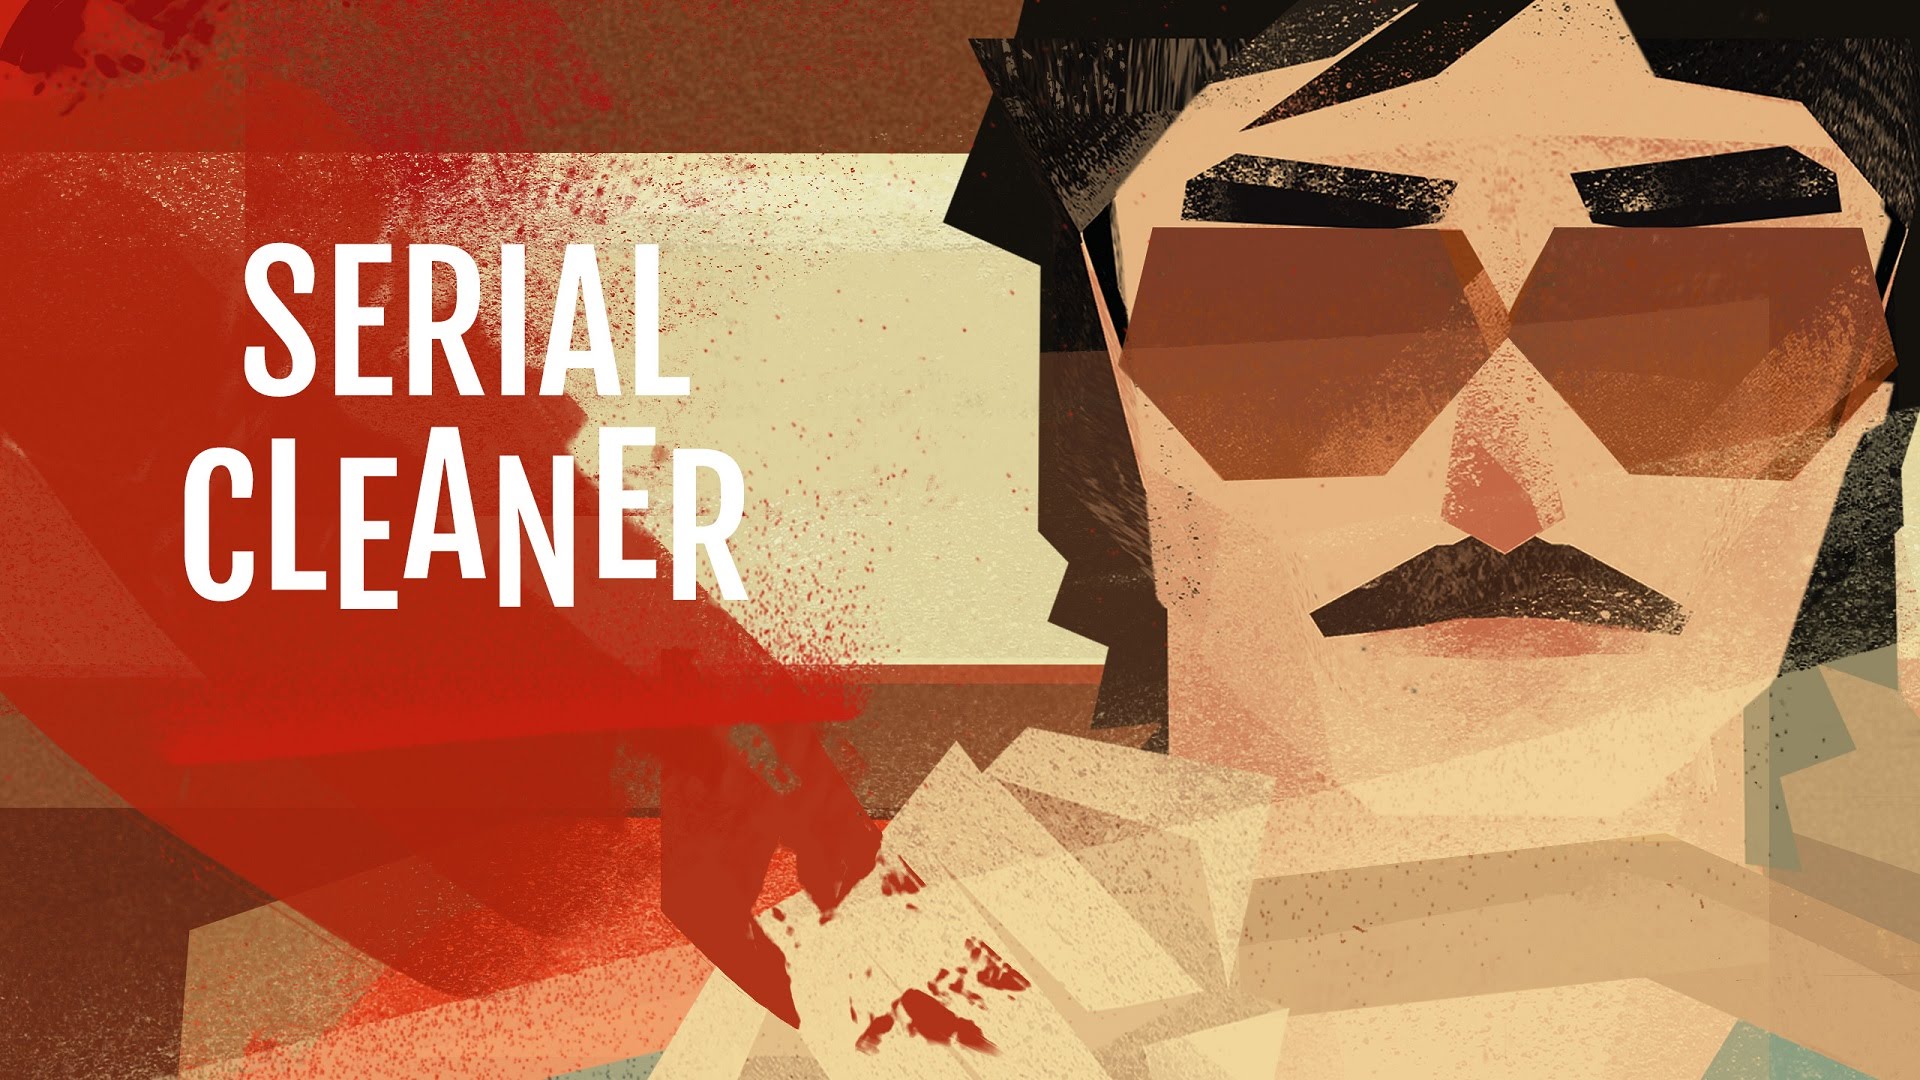 Serial Cleaner Review – The Ron Jeremy Moustache Is Back!